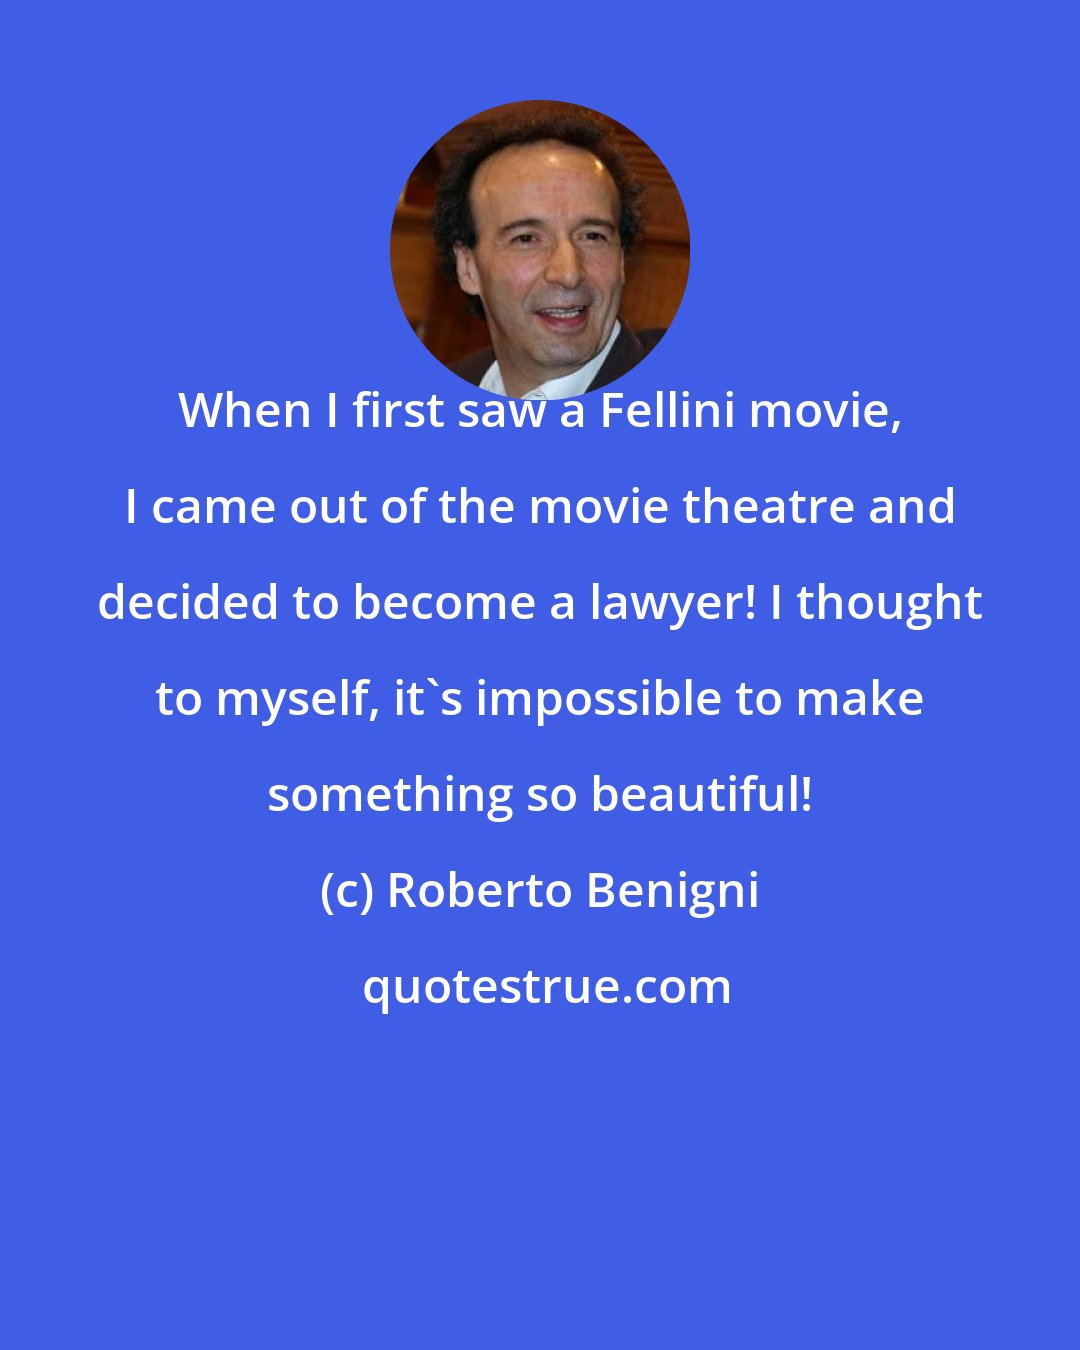 Roberto Benigni: When I first saw a Fellini movie, I came out of the movie theatre and decided to become a lawyer! I thought to myself, it's impossible to make something so beautiful!